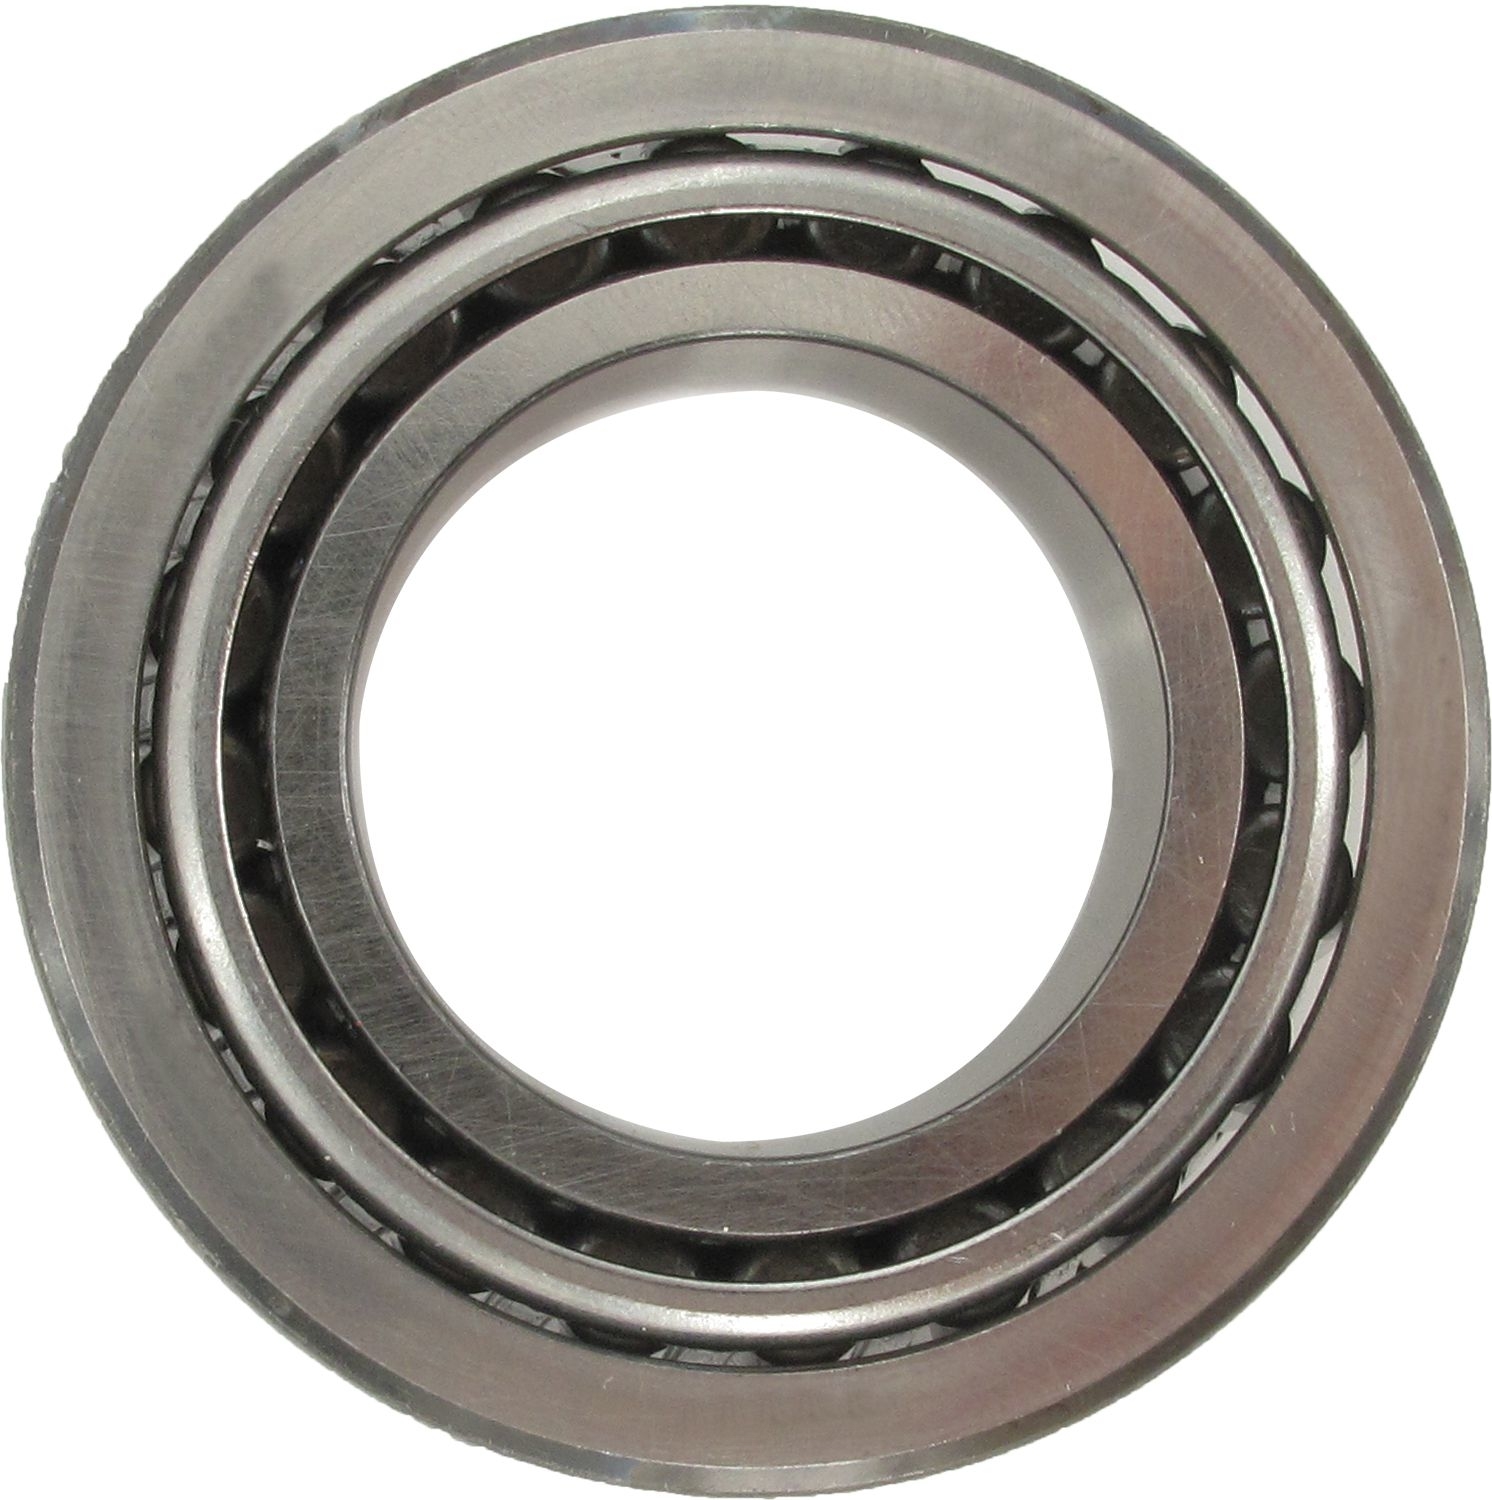 SKF (CHICAGO RAWHIDE) - Differential Pinion Bearing - SKF BR6 VP